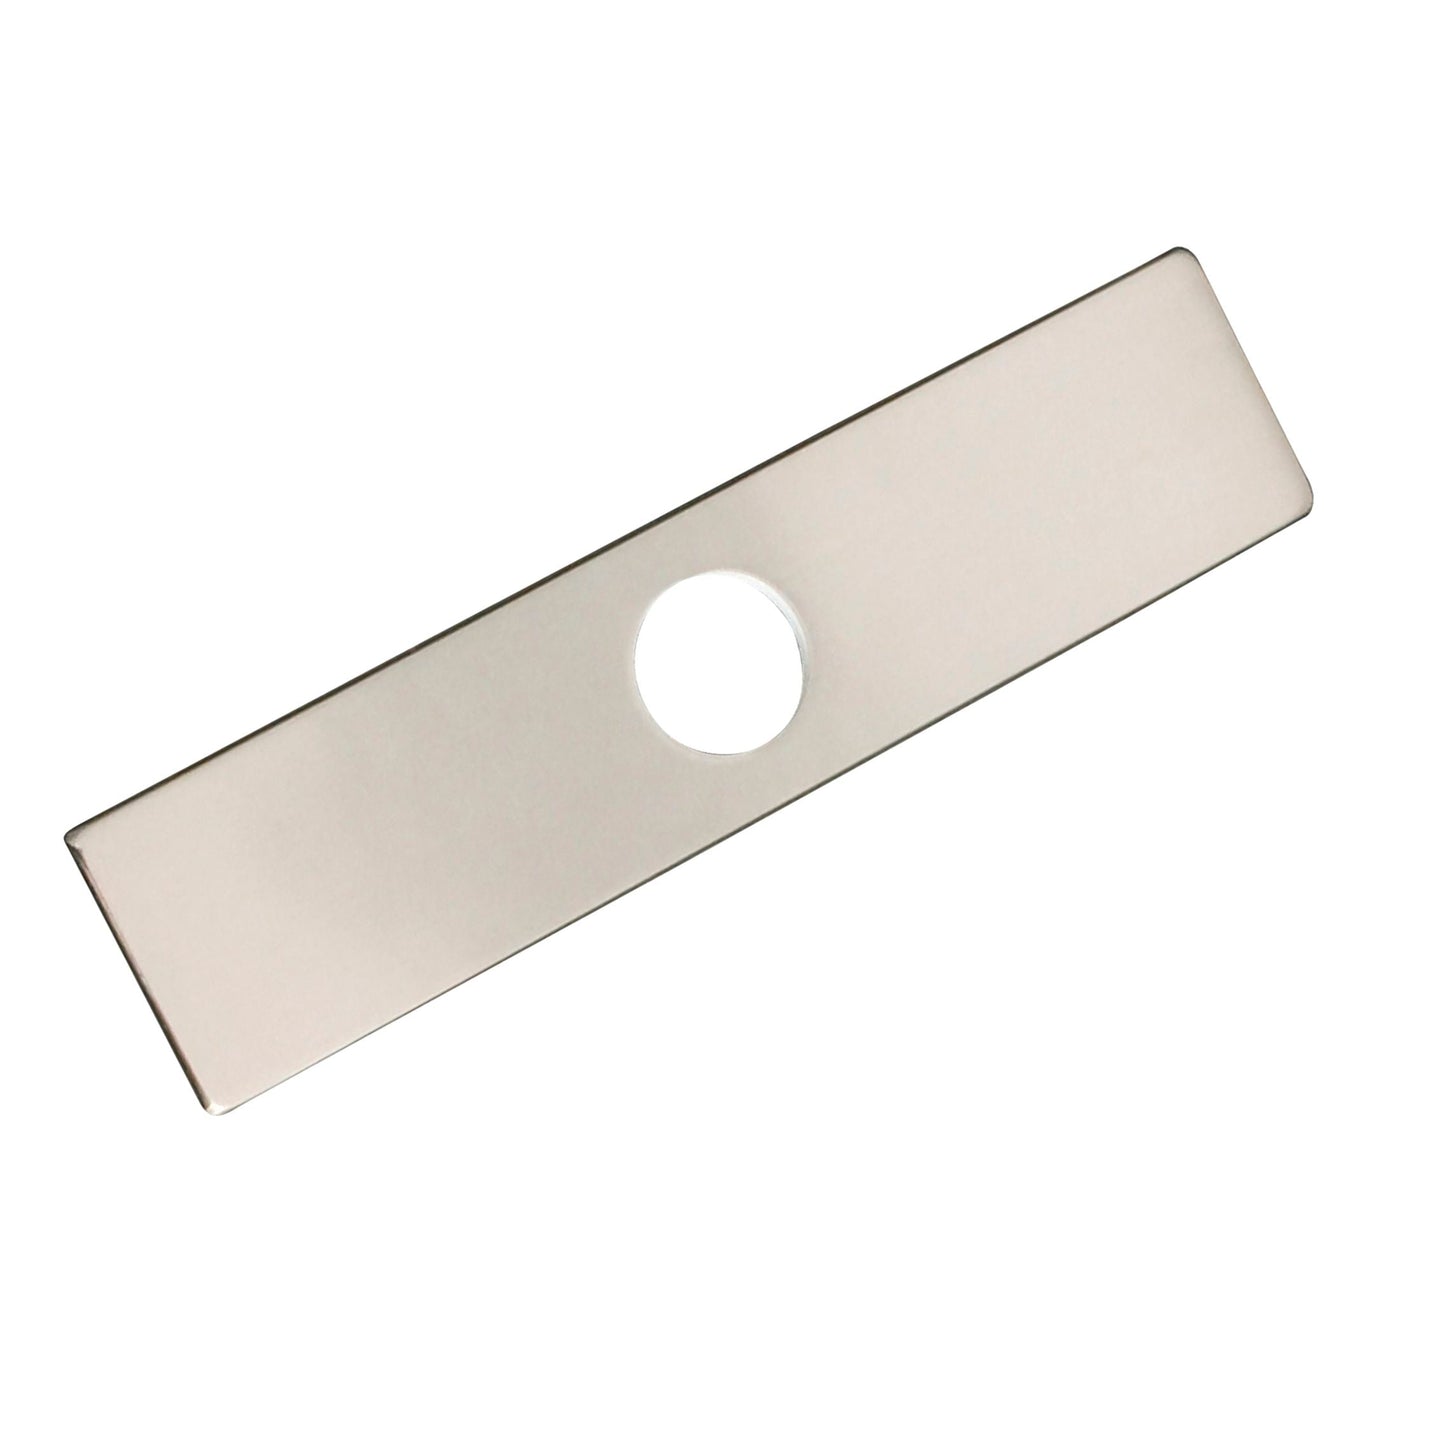 Stylish Kitchen Faucet Plate Hole Cover Deck Plate Escutcheon in Brushed Nickel Finish A-803B - Renoz